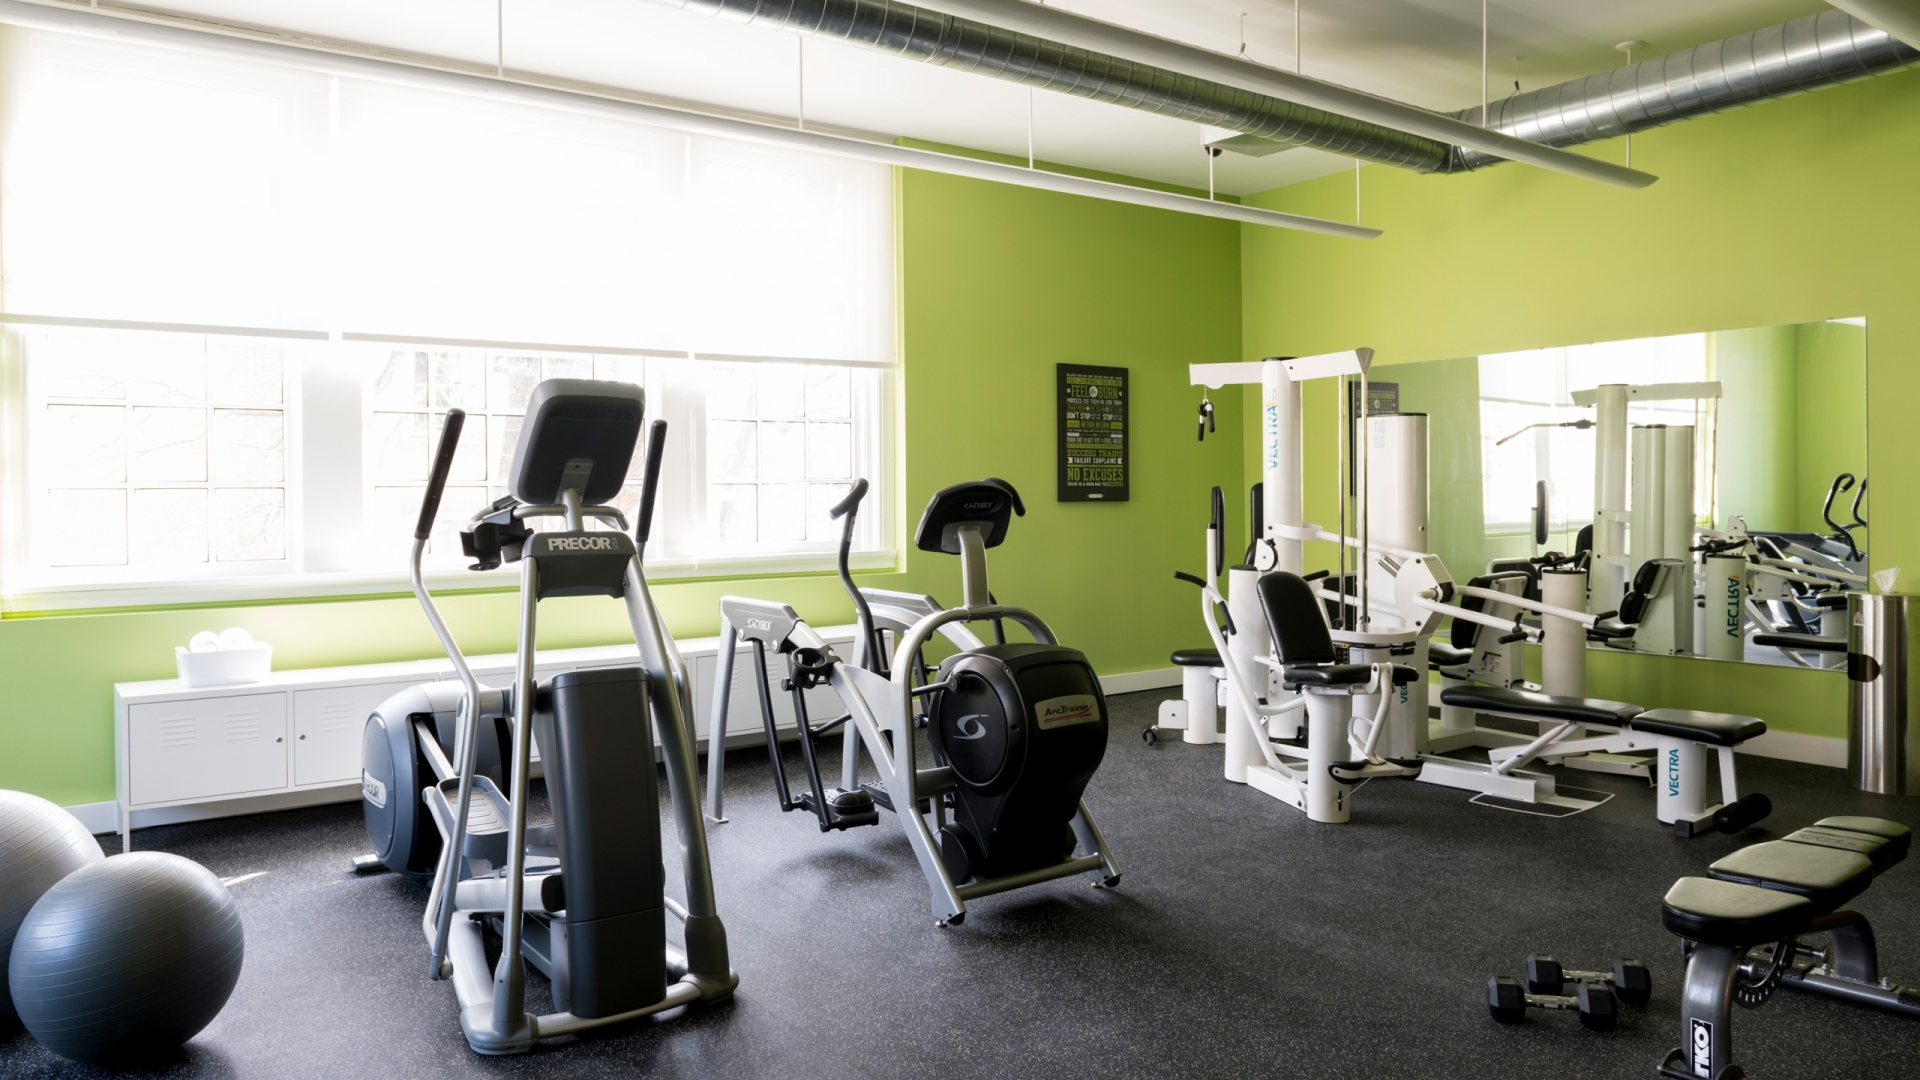 Green-walled gym room with various exercise equpitment.